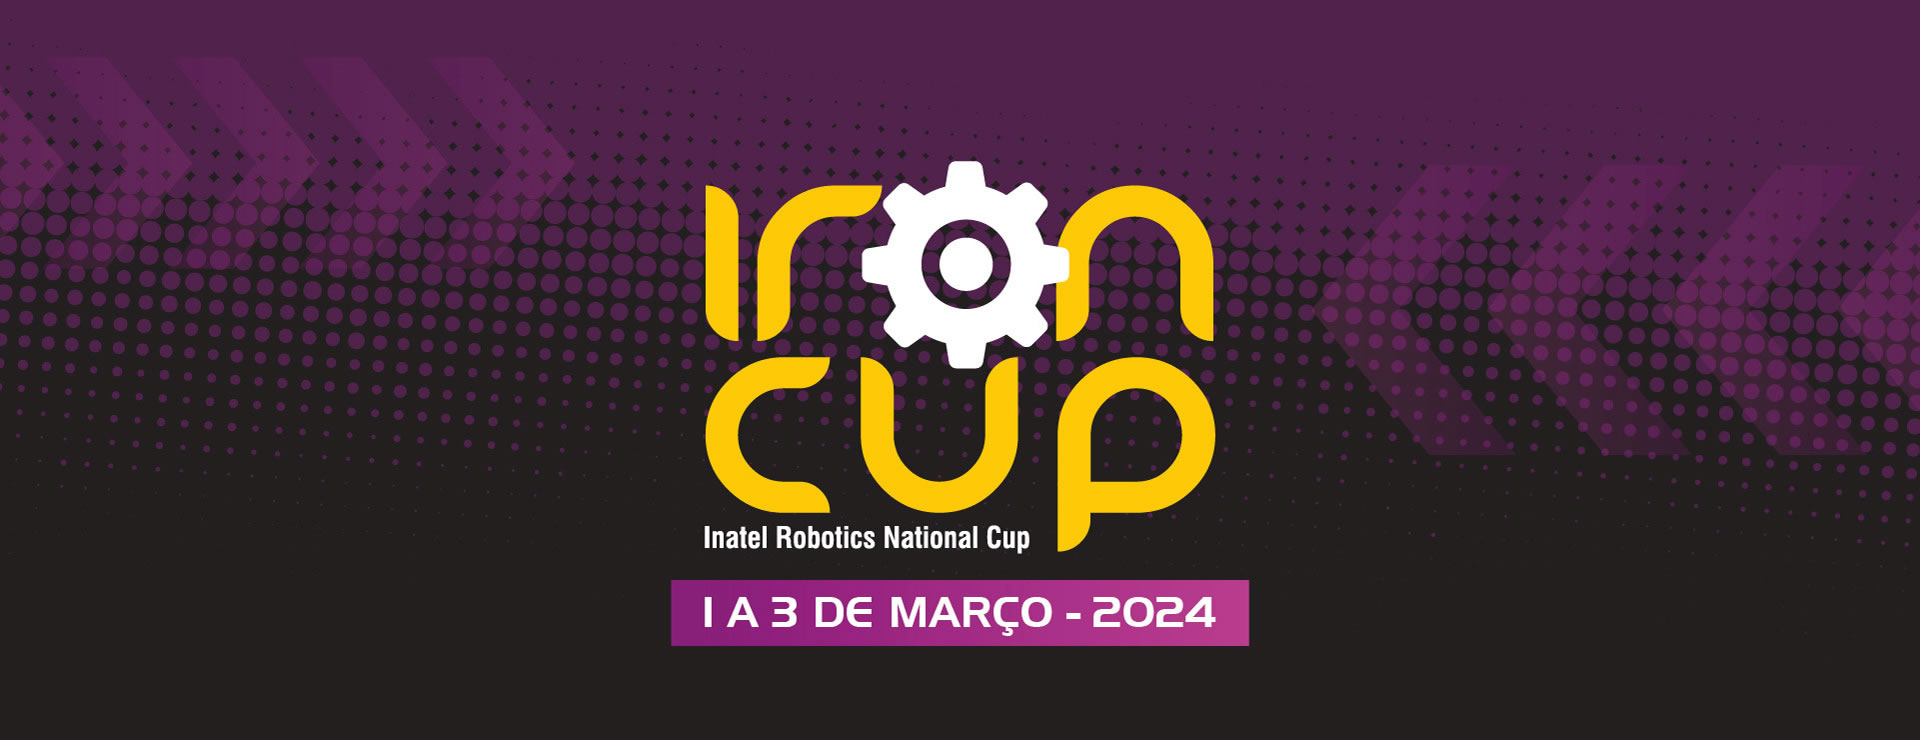 Iron Cup